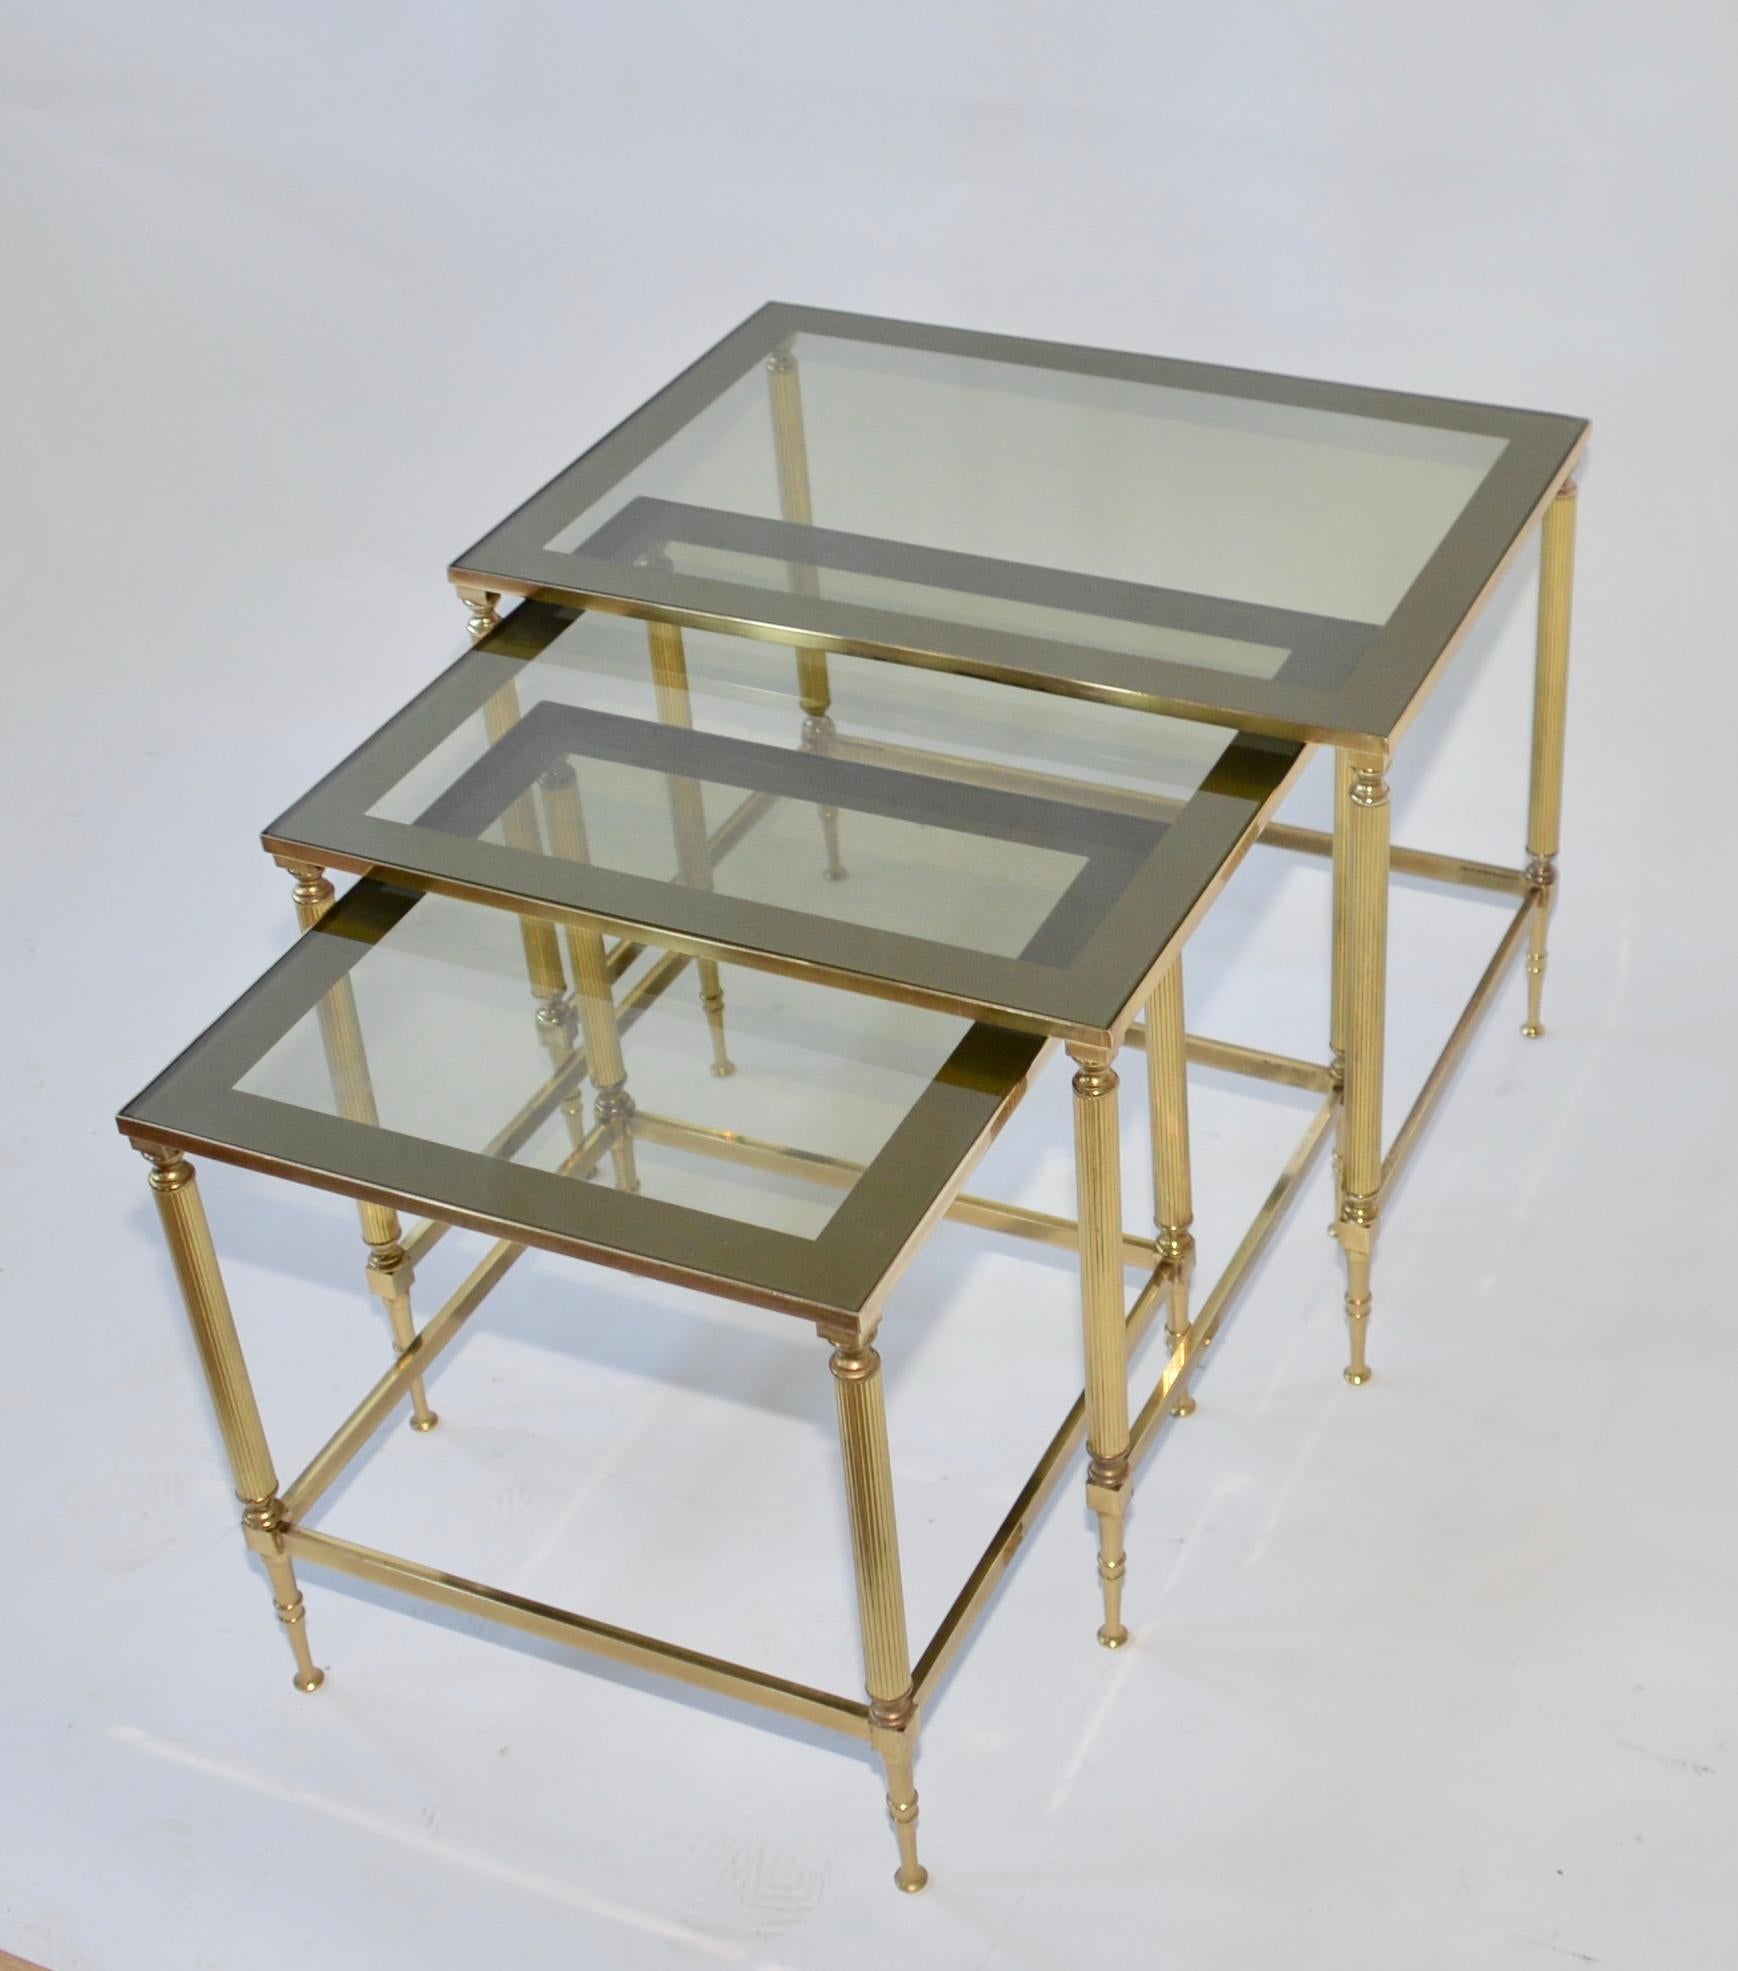 Vintage nest of three tables. The frames are in brass and each table has a smoked glass top. Very elegant and in true Hollywood Regency style. The dimensions listed are for the largest table, The medium table is 40cm H, 45 W, 37 D, the small table